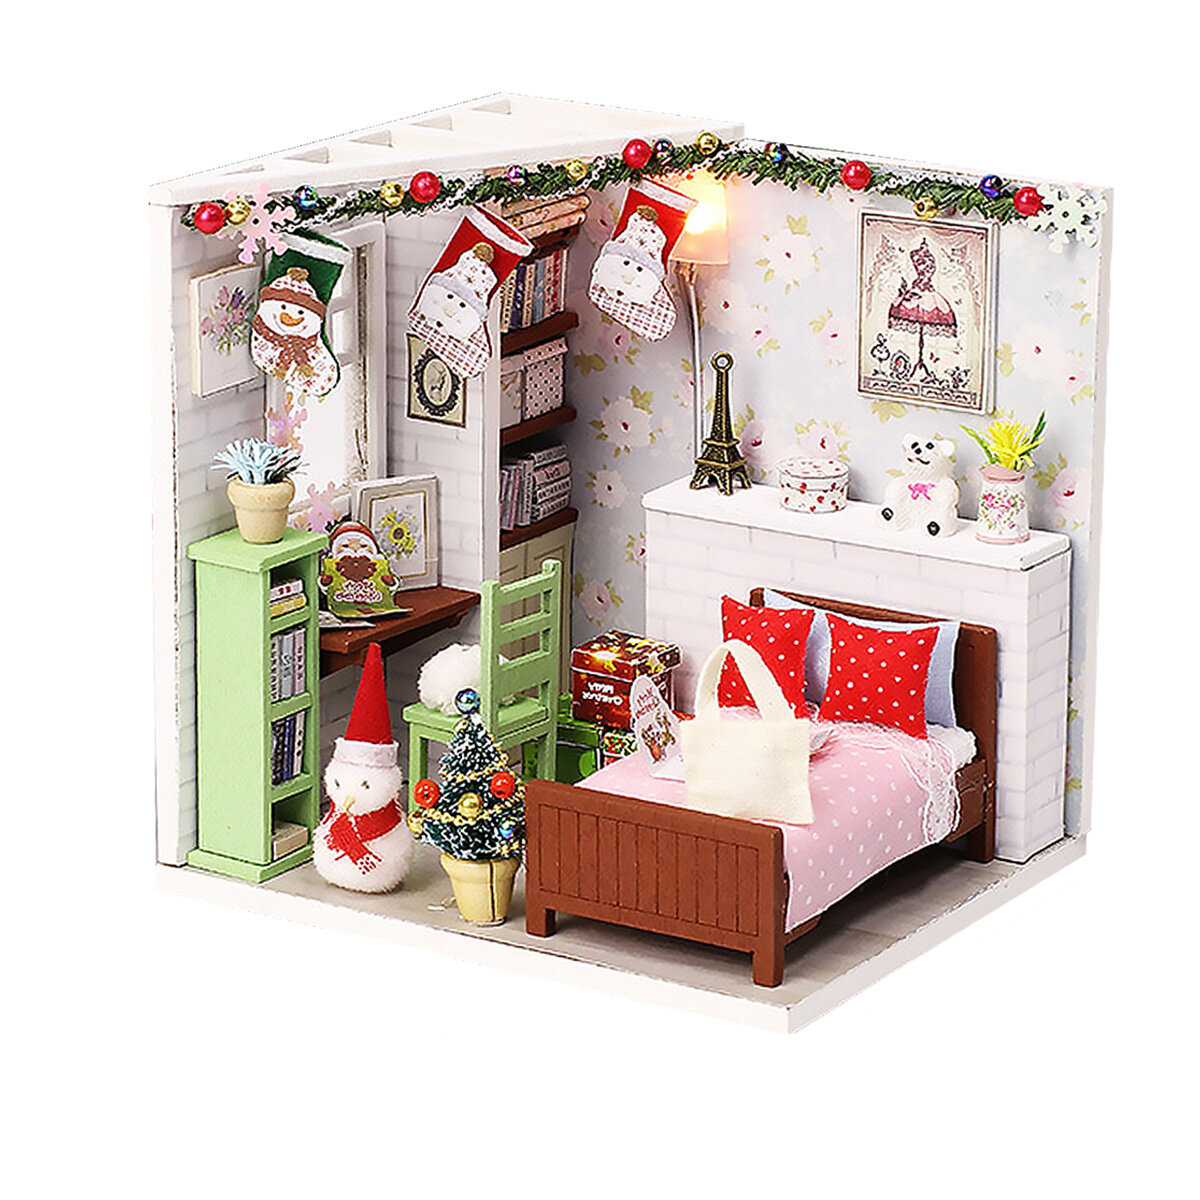 

Wooden Bedroom DIY Handmade Assemble Doll House Miniature Furniture Kit Education Toy with LED Light for Collection Birt